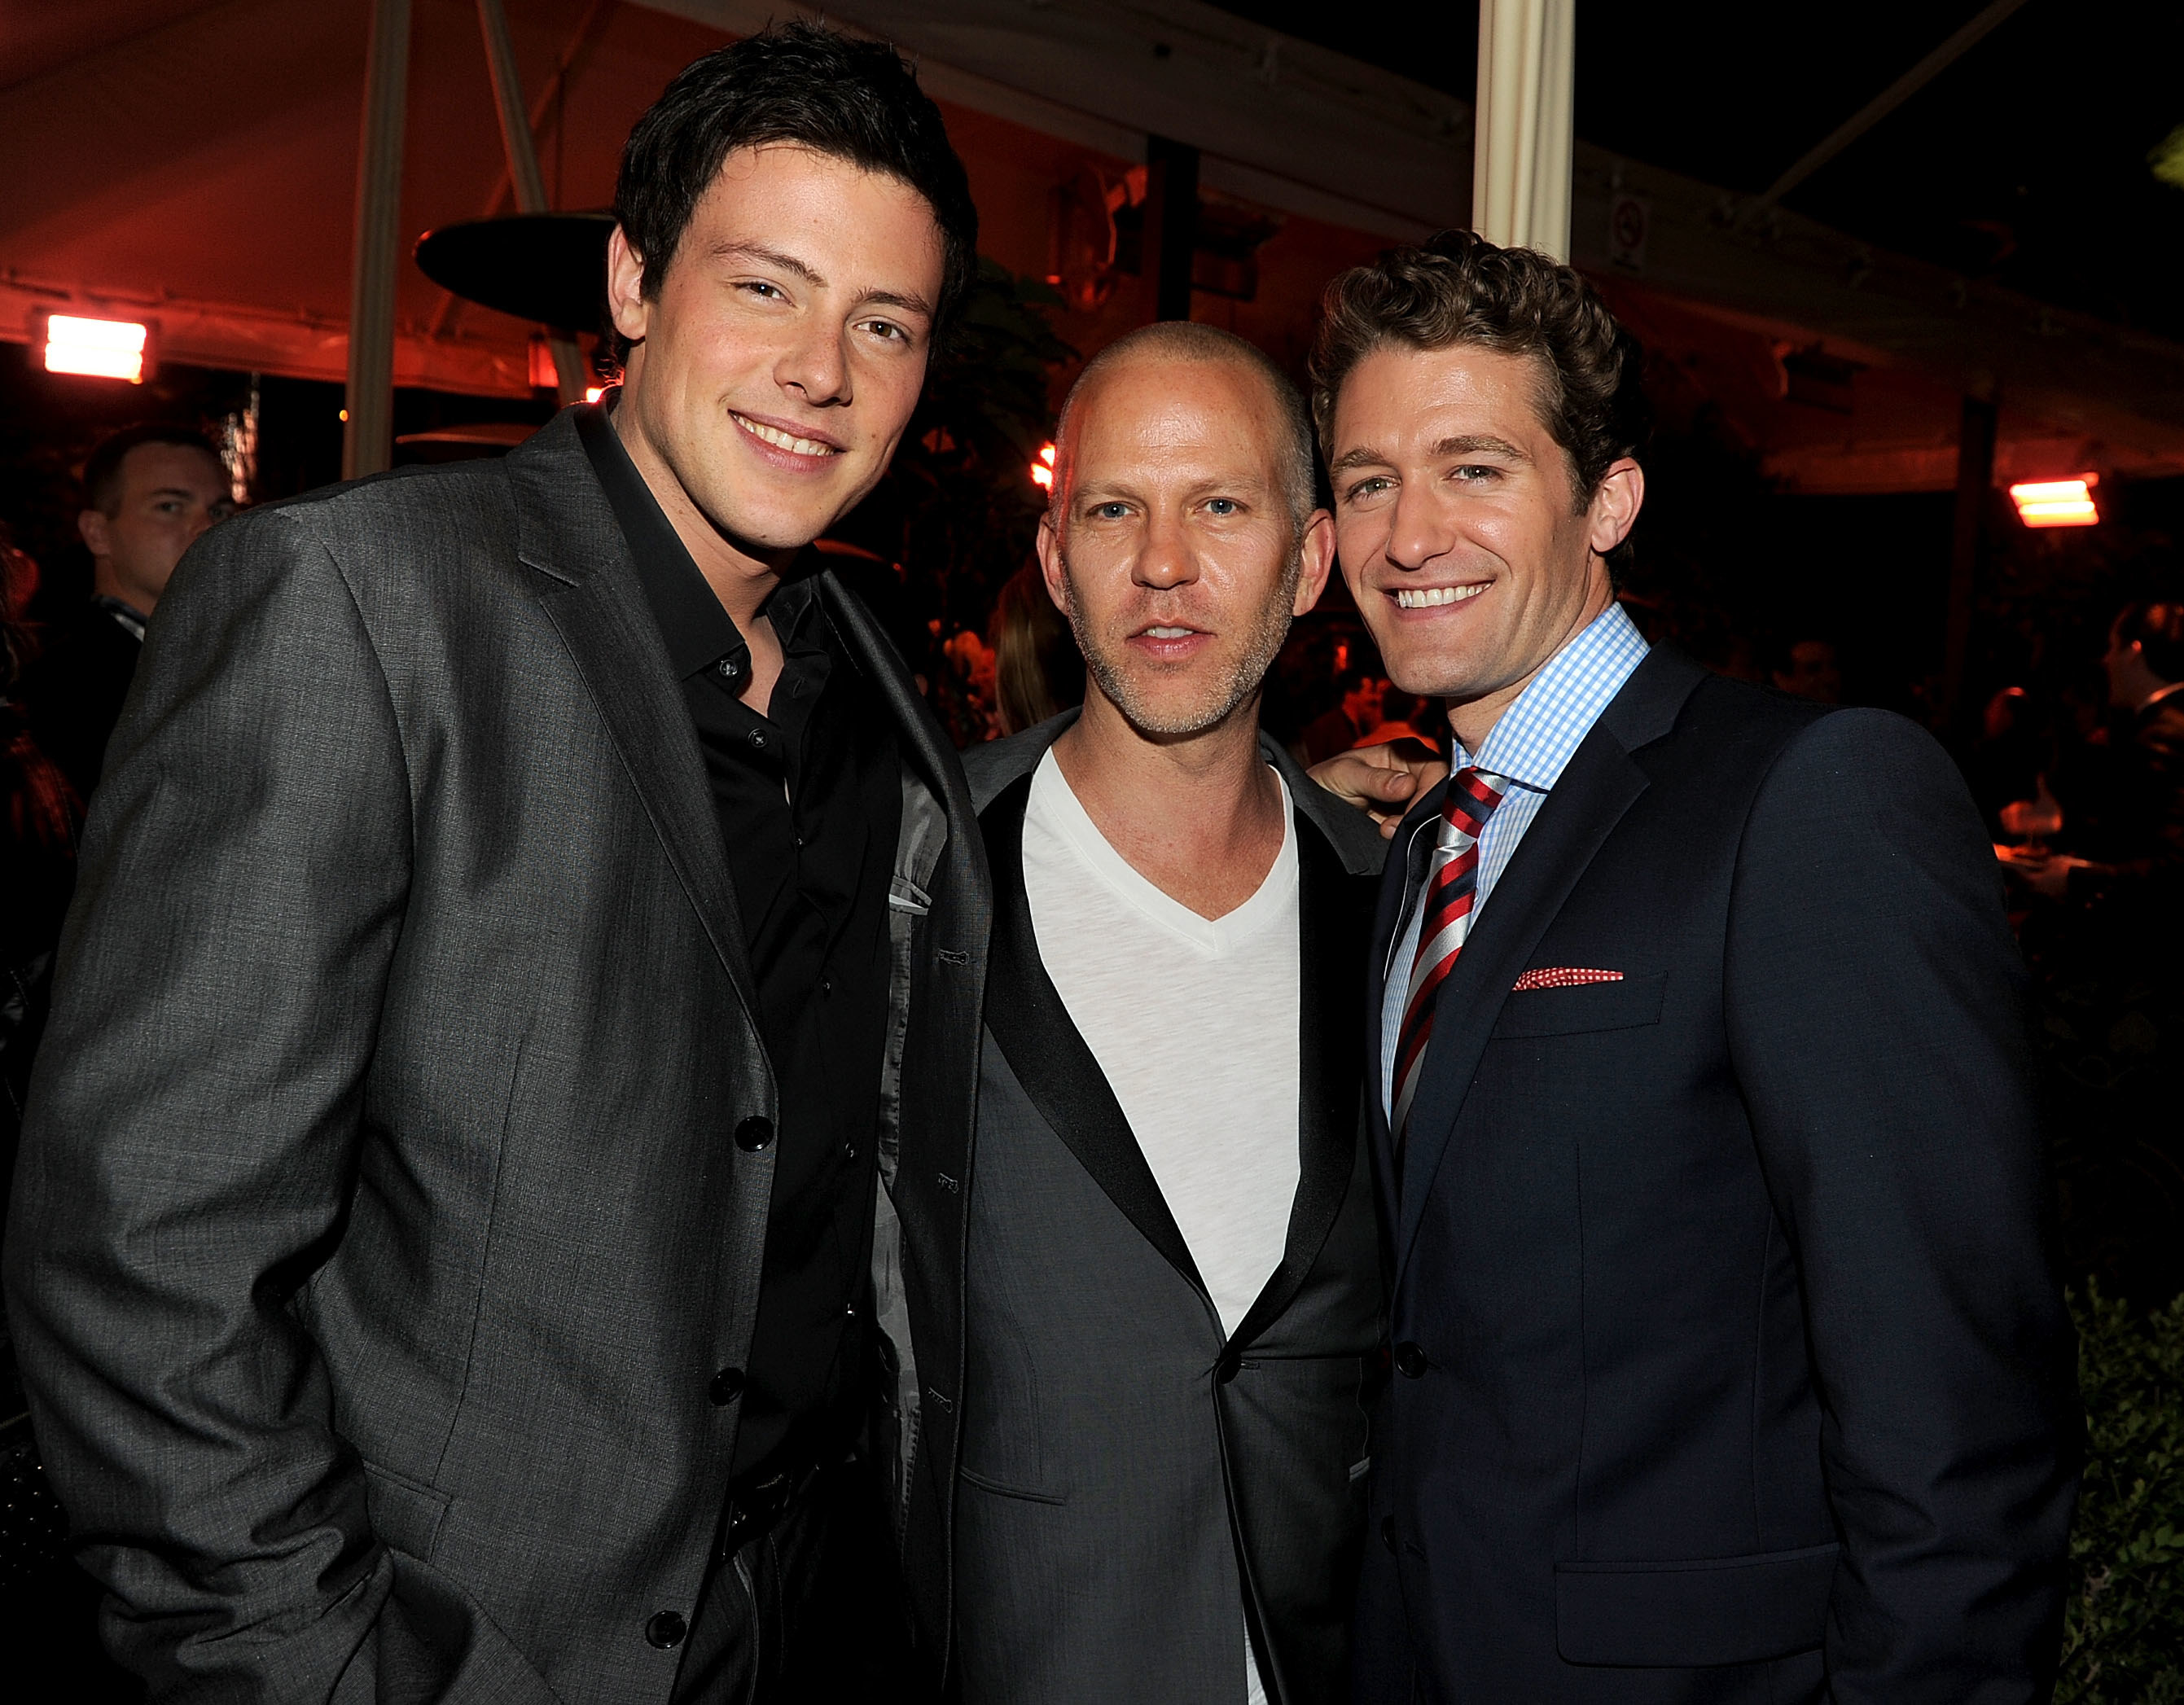 Cory, Ryan, and Matthew Morrison pose together for a photograph at an event